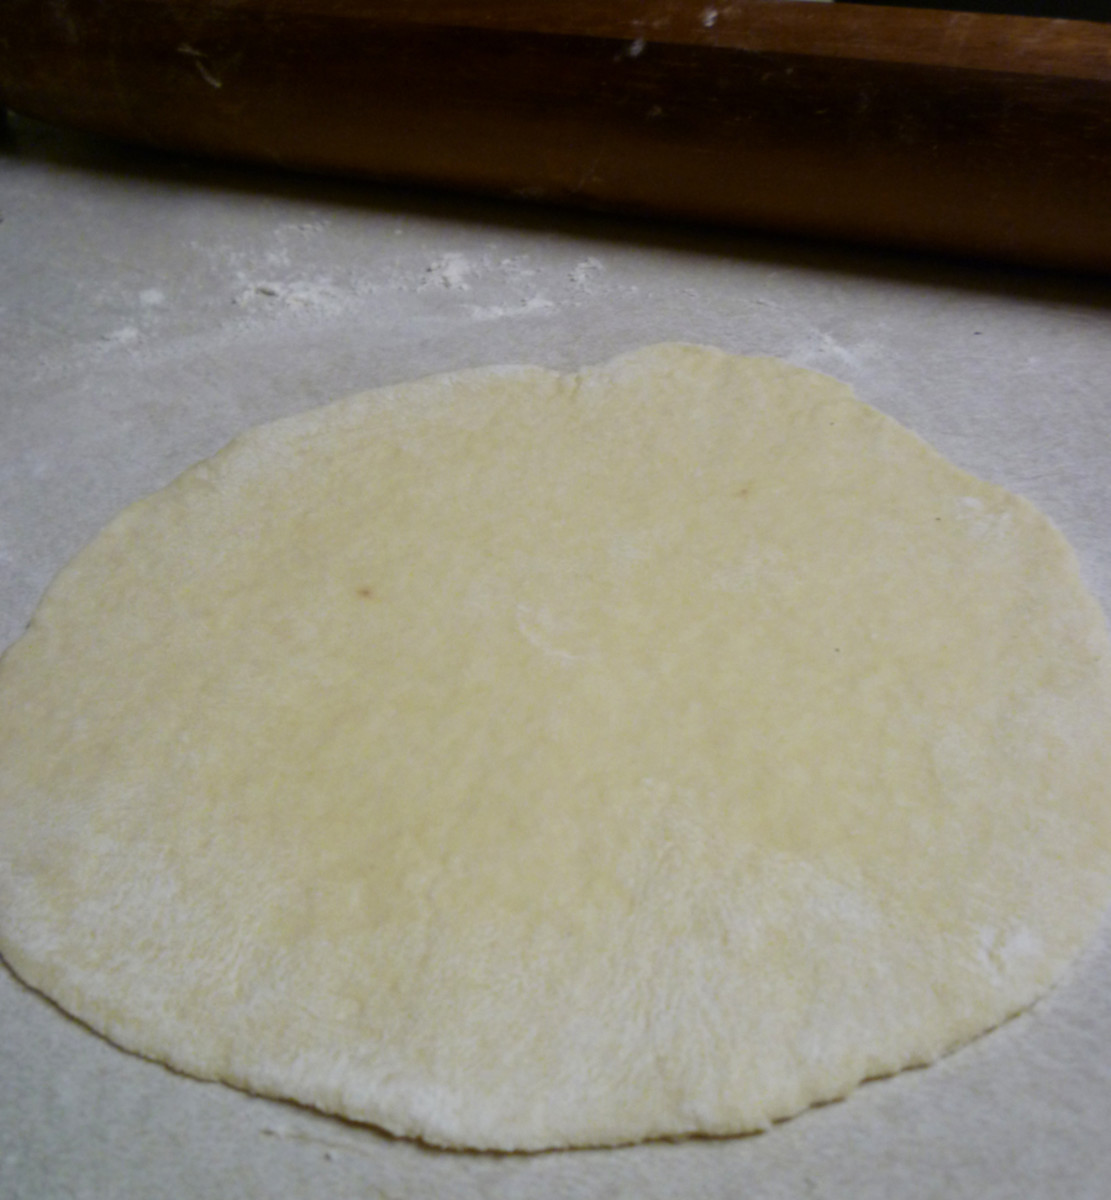 Transfer dough to a well-floured surface and knead for 3-5 minutes. Move back to the bowl, and leave to rest covered at room temperature for 20-25 minutes.